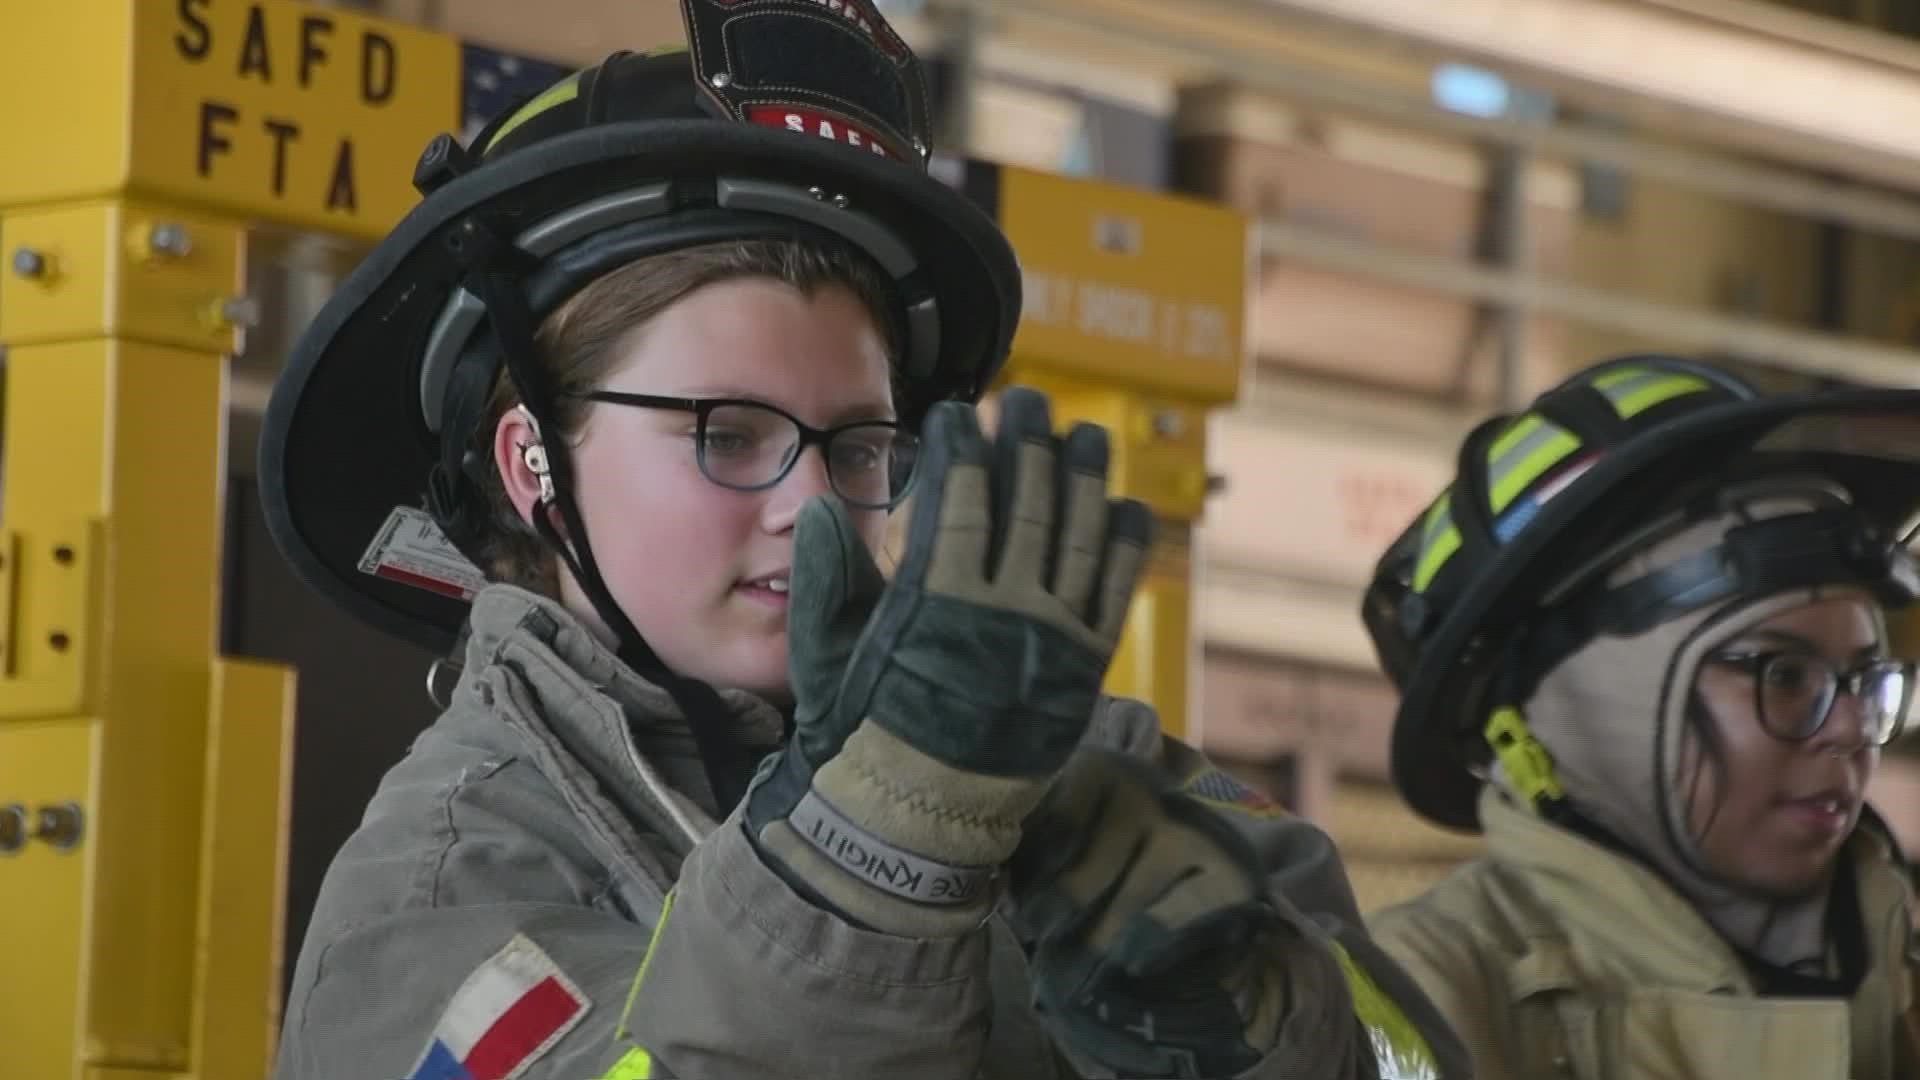 The goal of the academy is introduce more girls to firefighting.